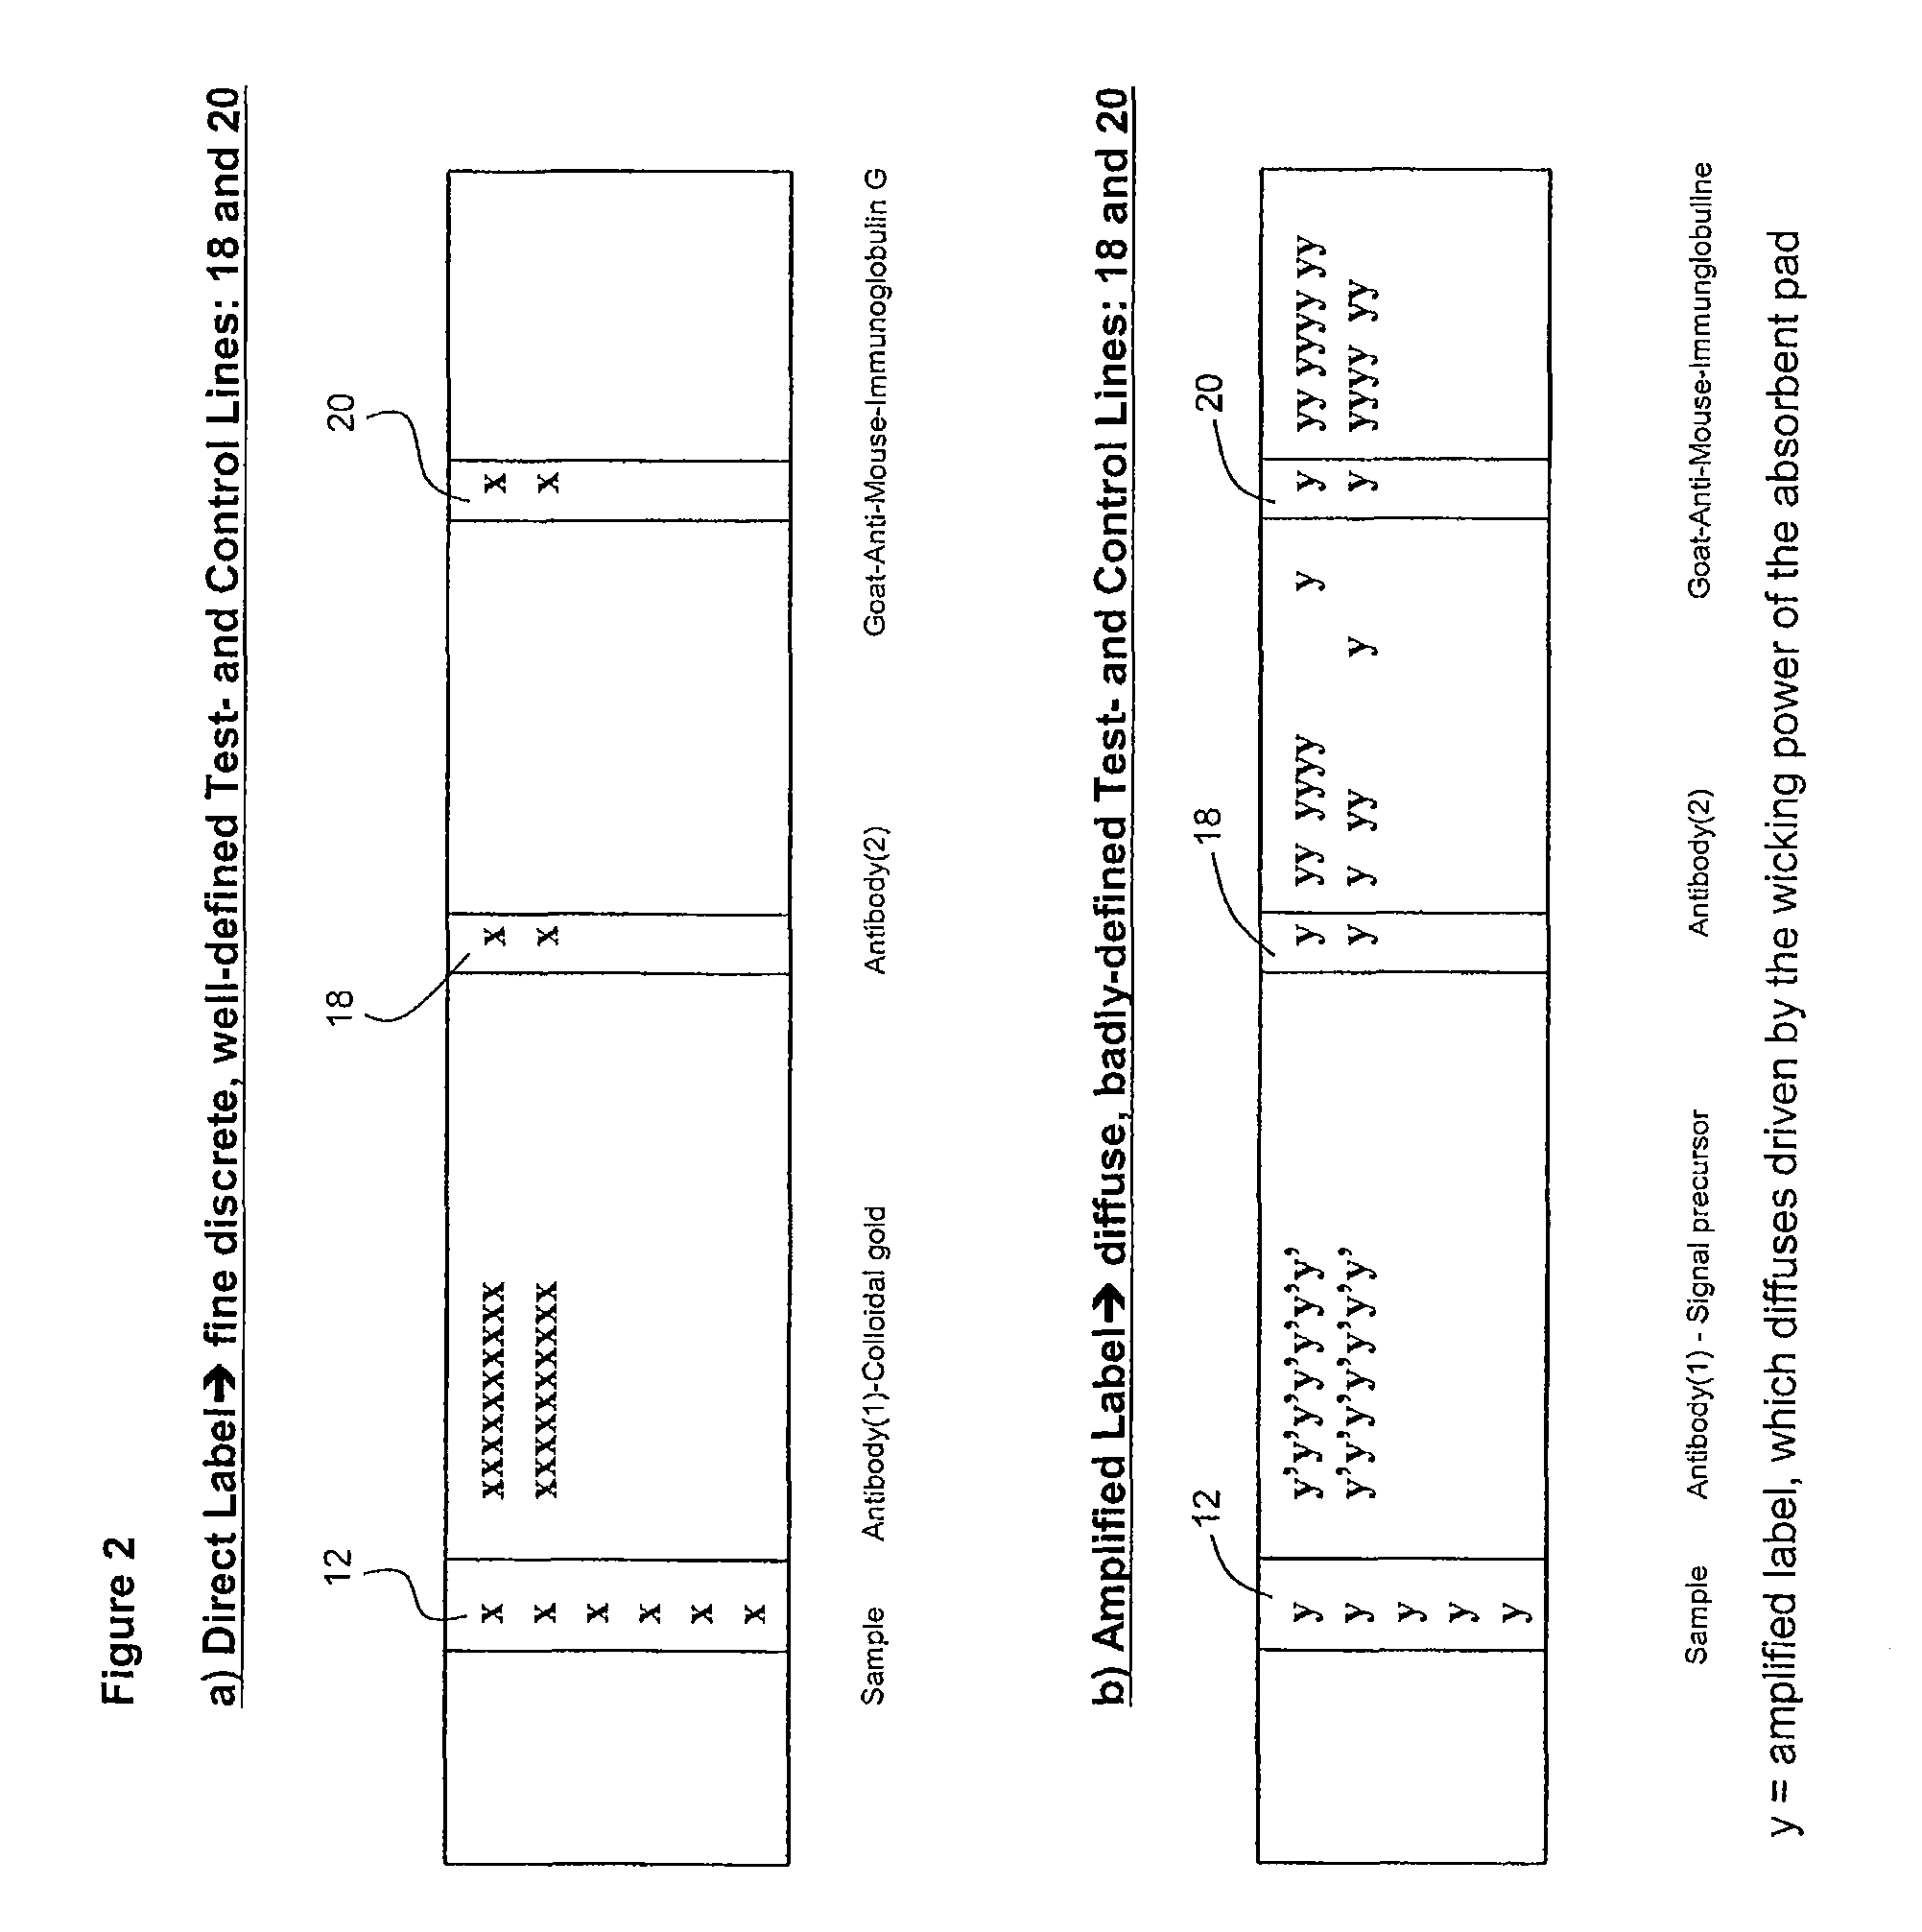 Methods of signal generation and signal localization for improvement of signal readability in solid phase based bioassays